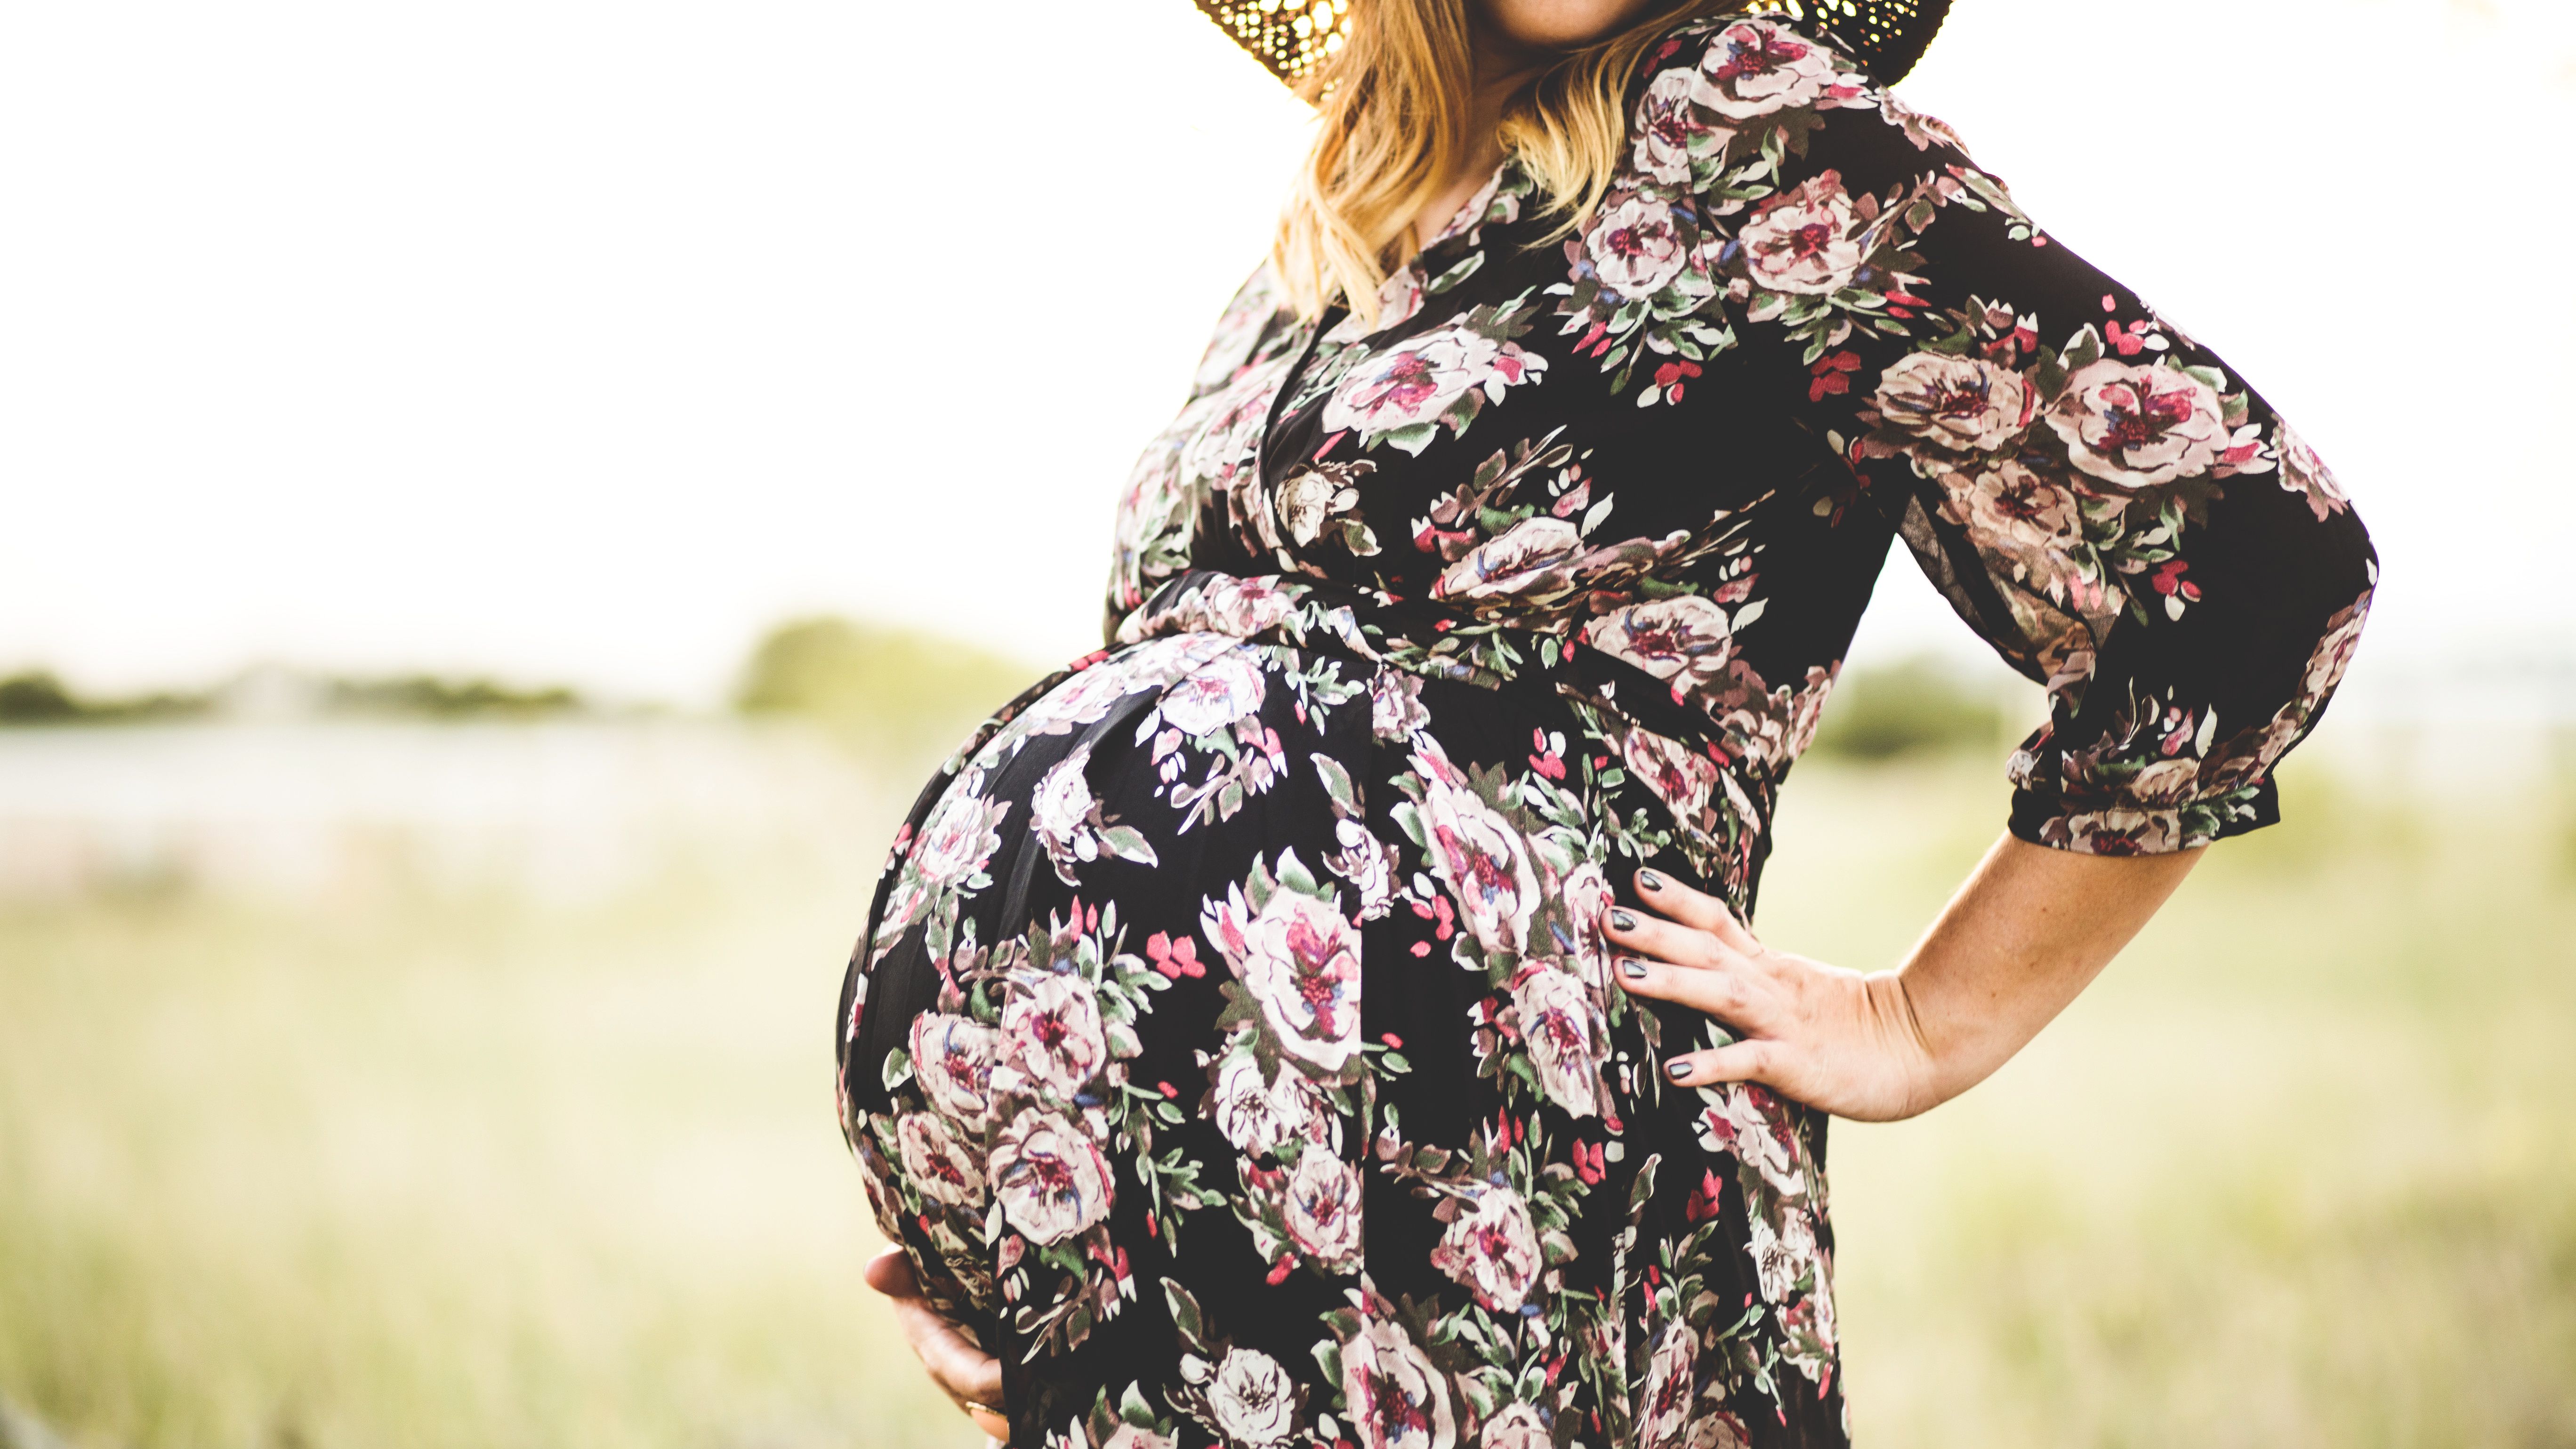 8 Places Where You Can Go Buy Maternity Clothes